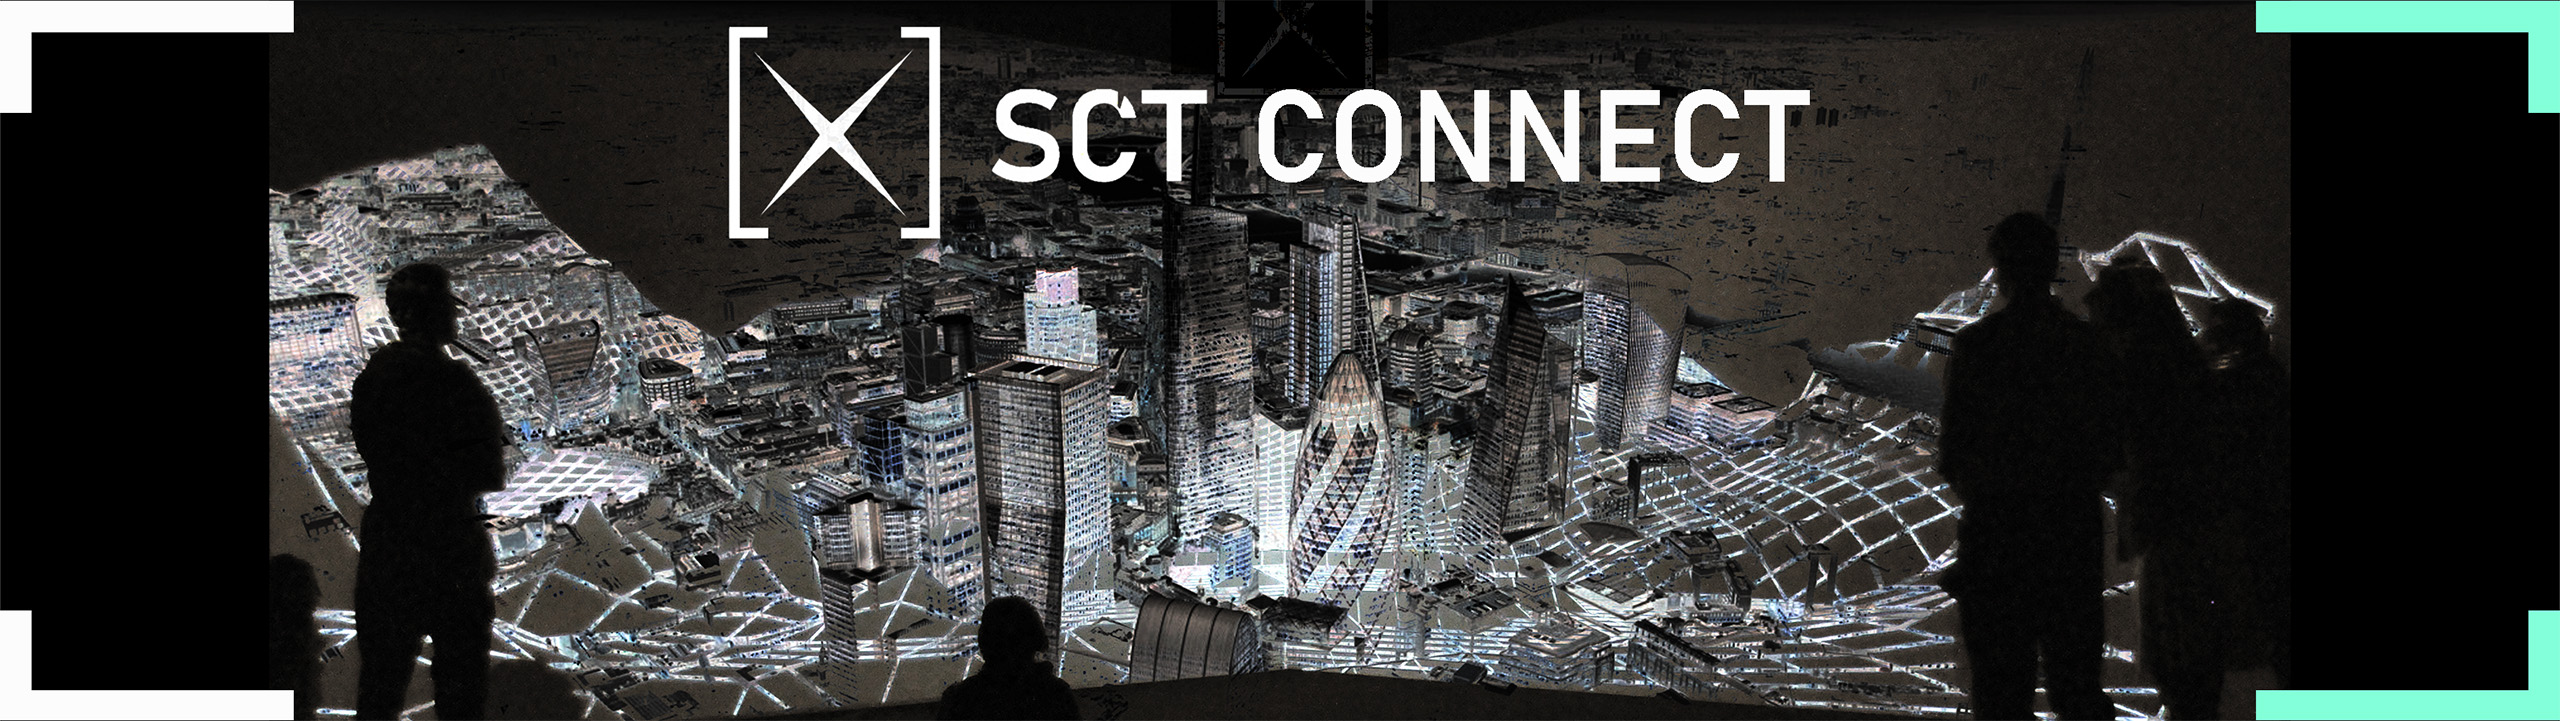 [X] SCT Connect